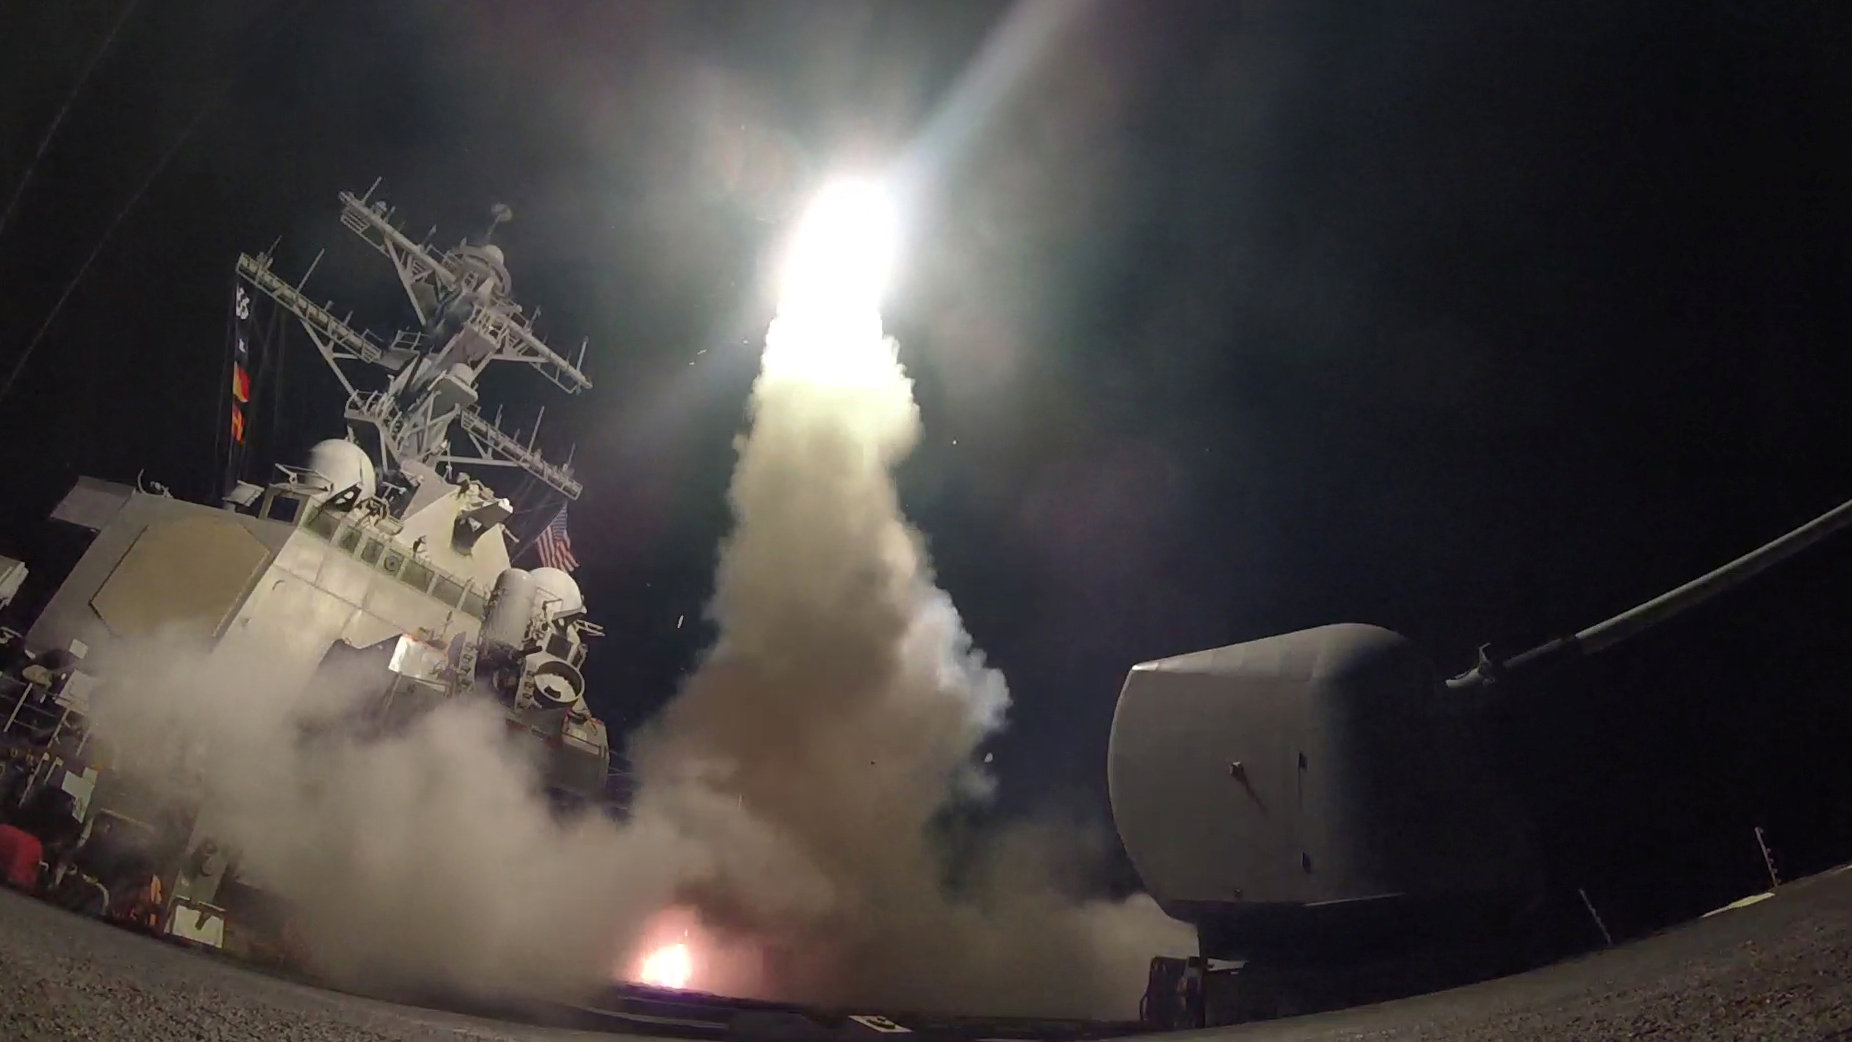 The USS Porter, in the Mediterranean Sea, fires a Tomahawk missile April 7. (CNS/U.S. Navy handout via Reuters)